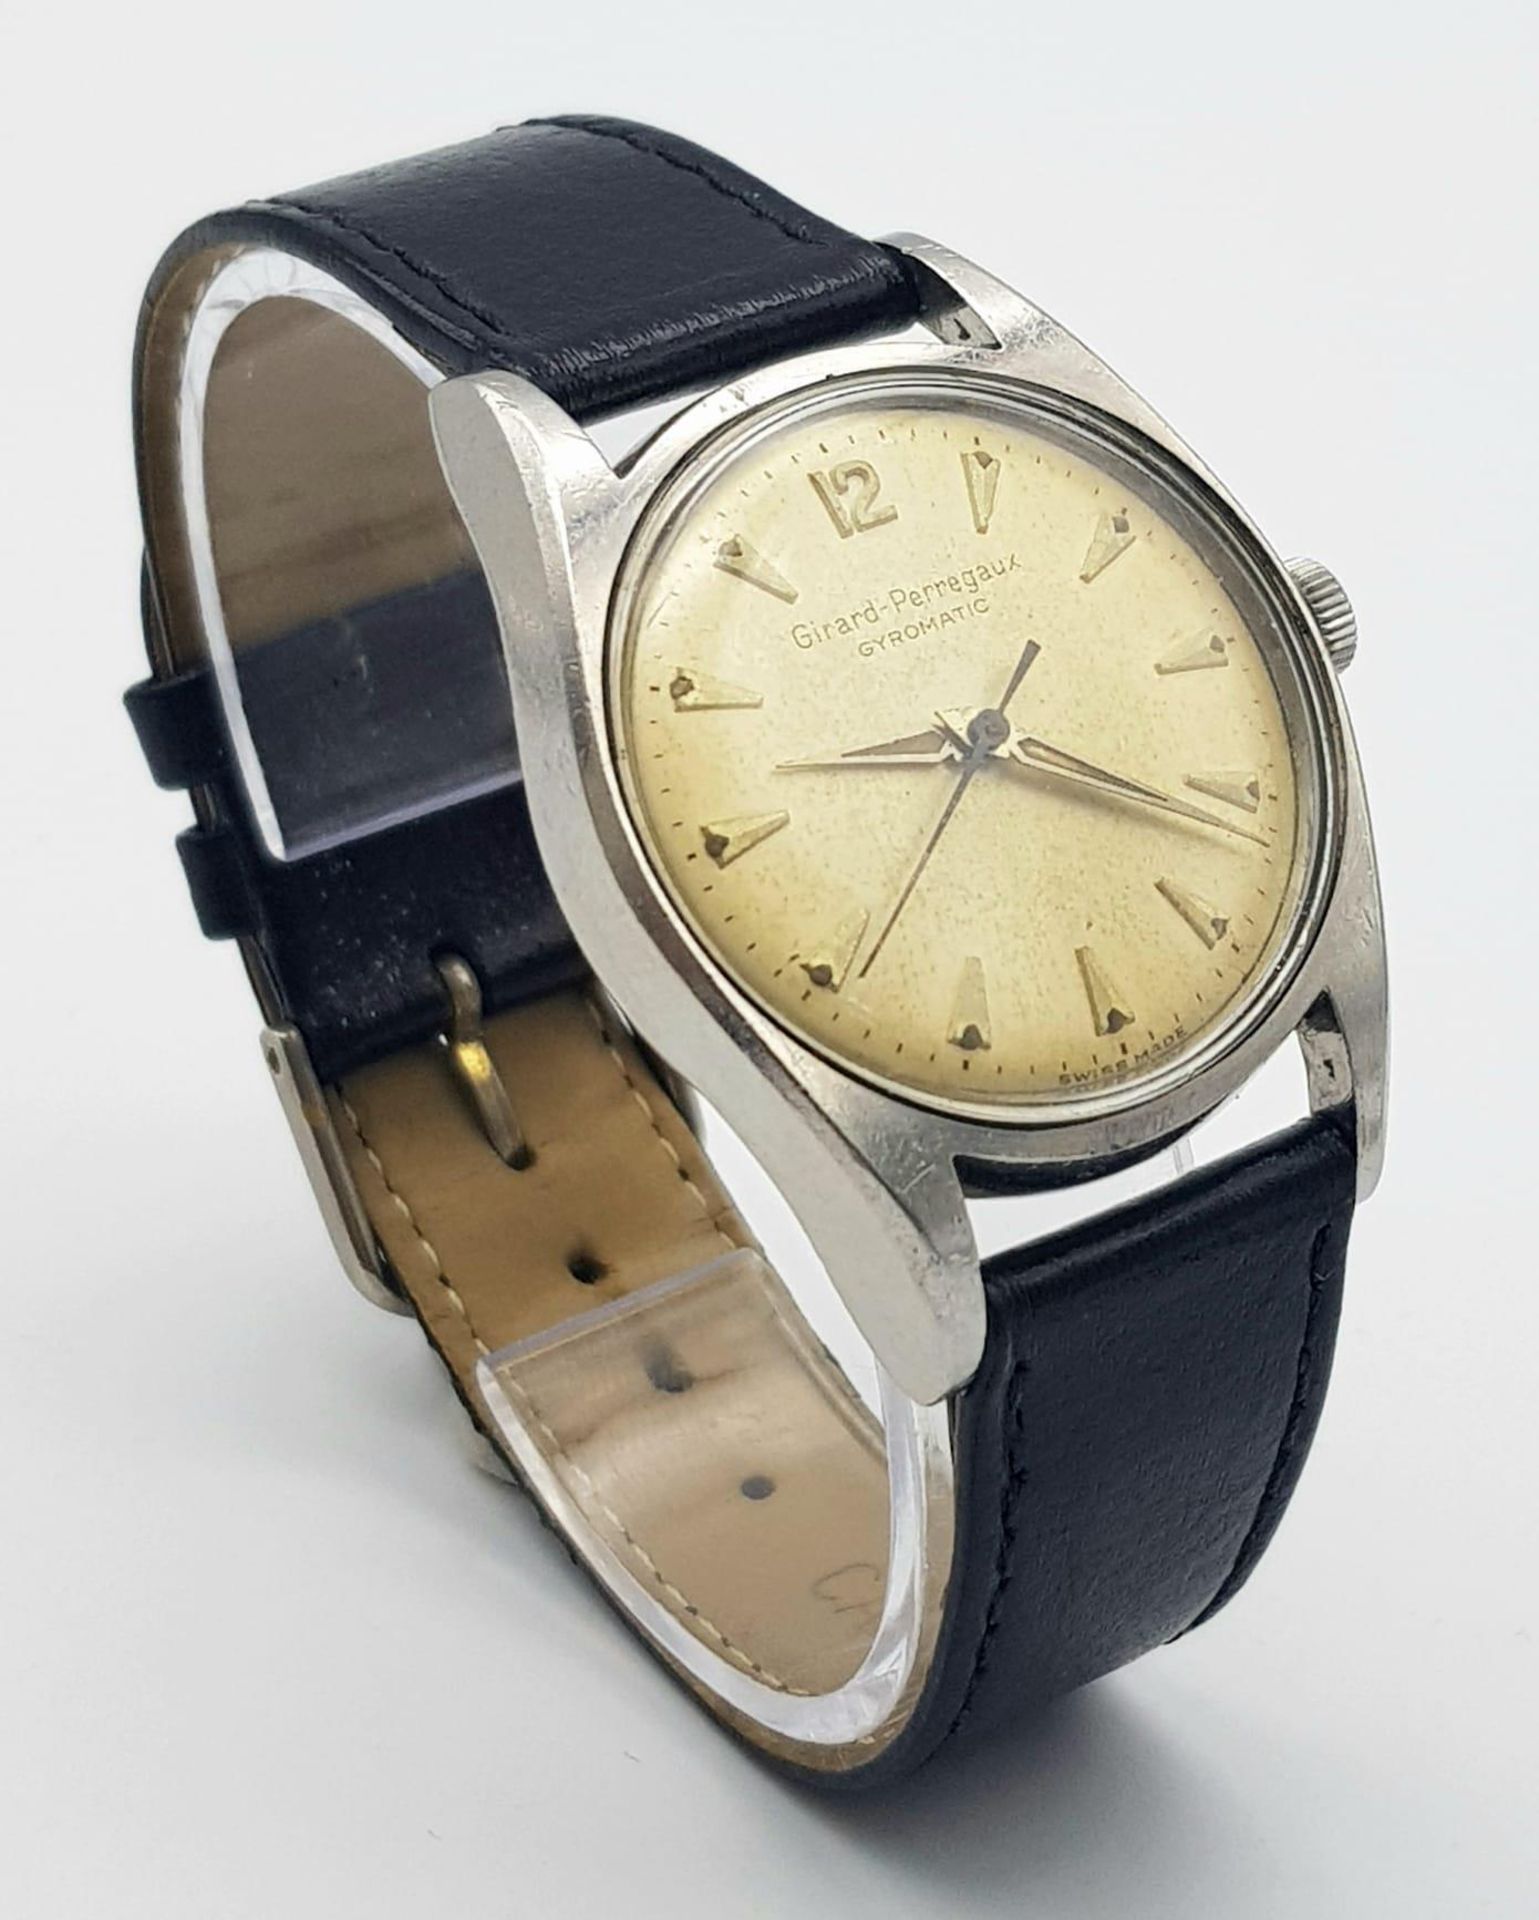 A VINTAGE GIRARD-PERREGAUX "GYROMATIC" MID SIZE WATCH , MANUAL WIND AND ON A BLACK LEATHER STRAP .